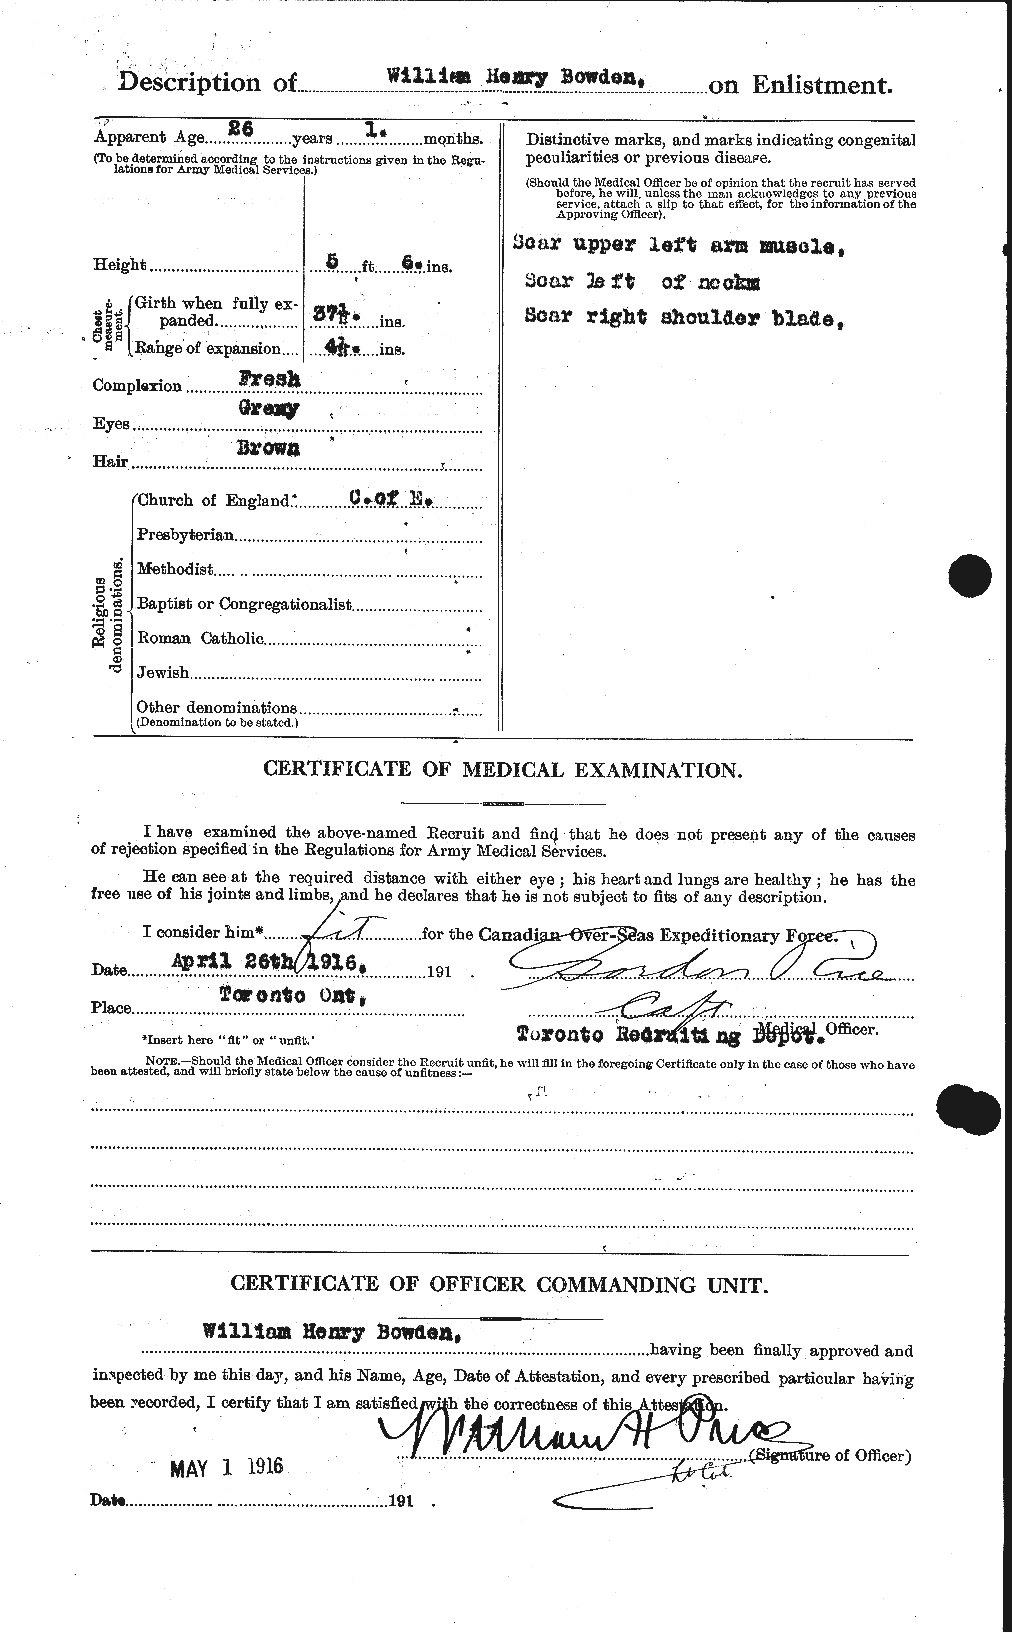 Personnel Records of the First World War - CEF 255300b